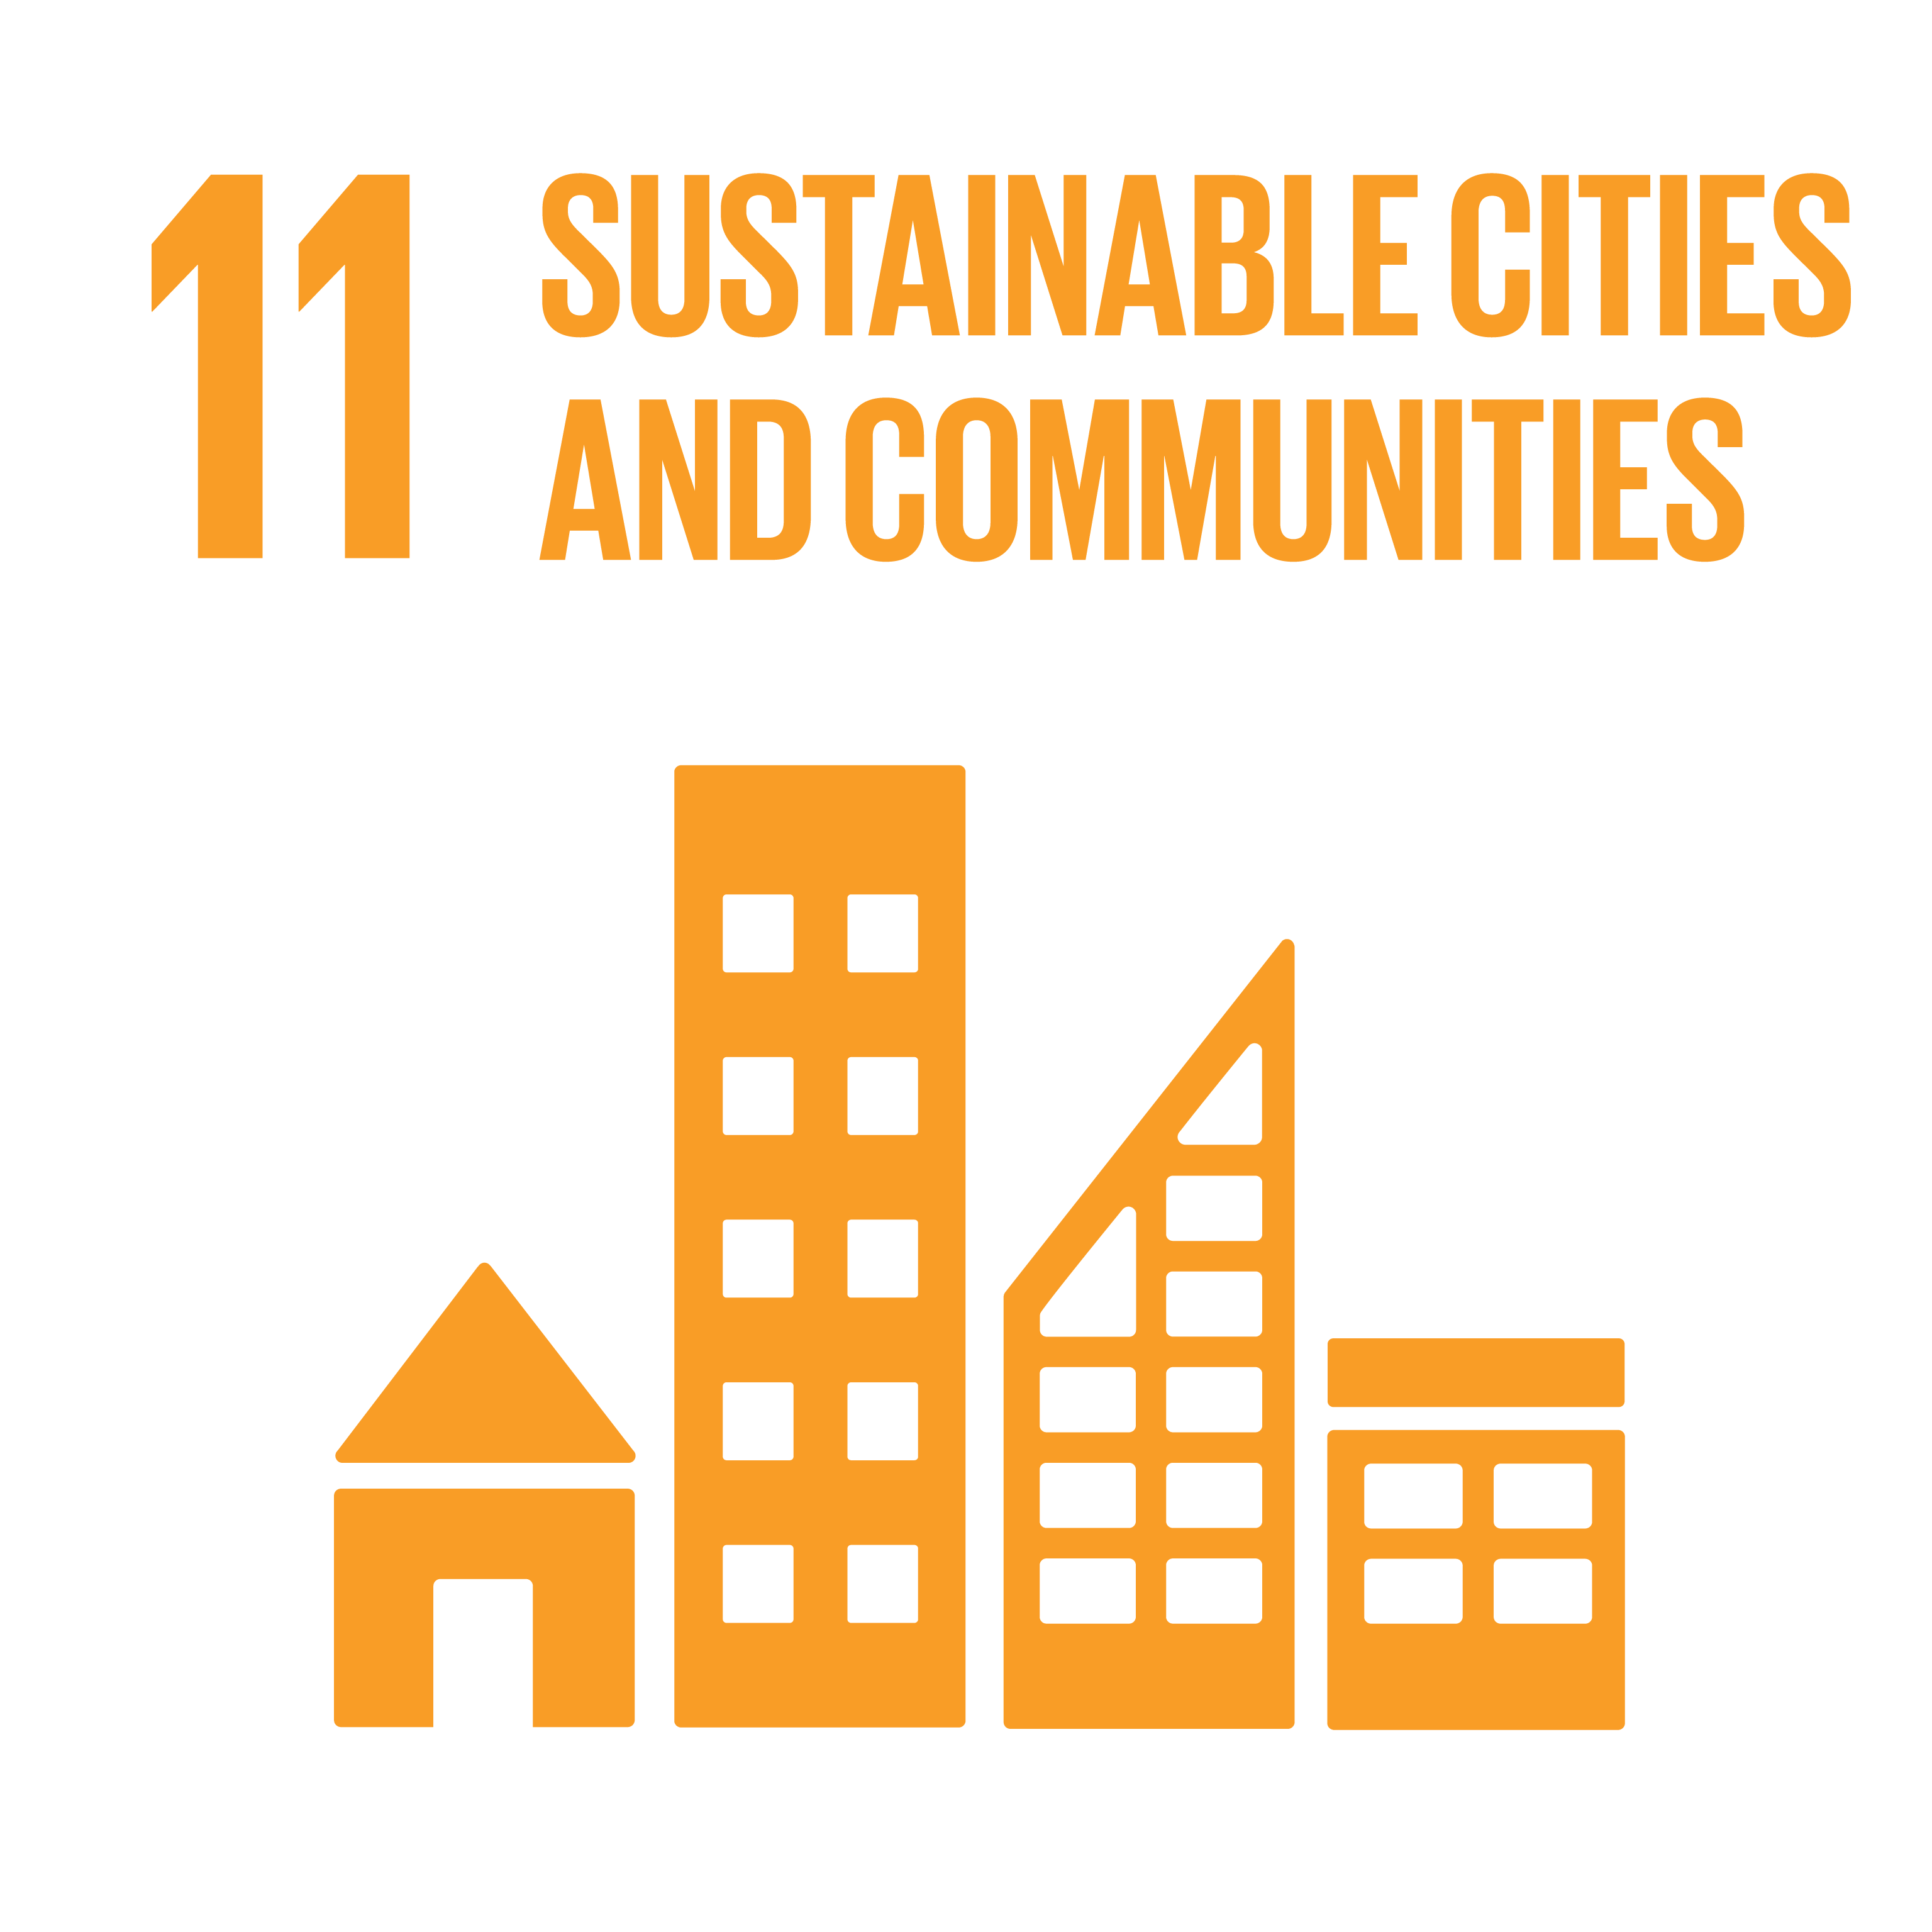 Make cities and human settlements inclusive, safe, resilient and sustainable